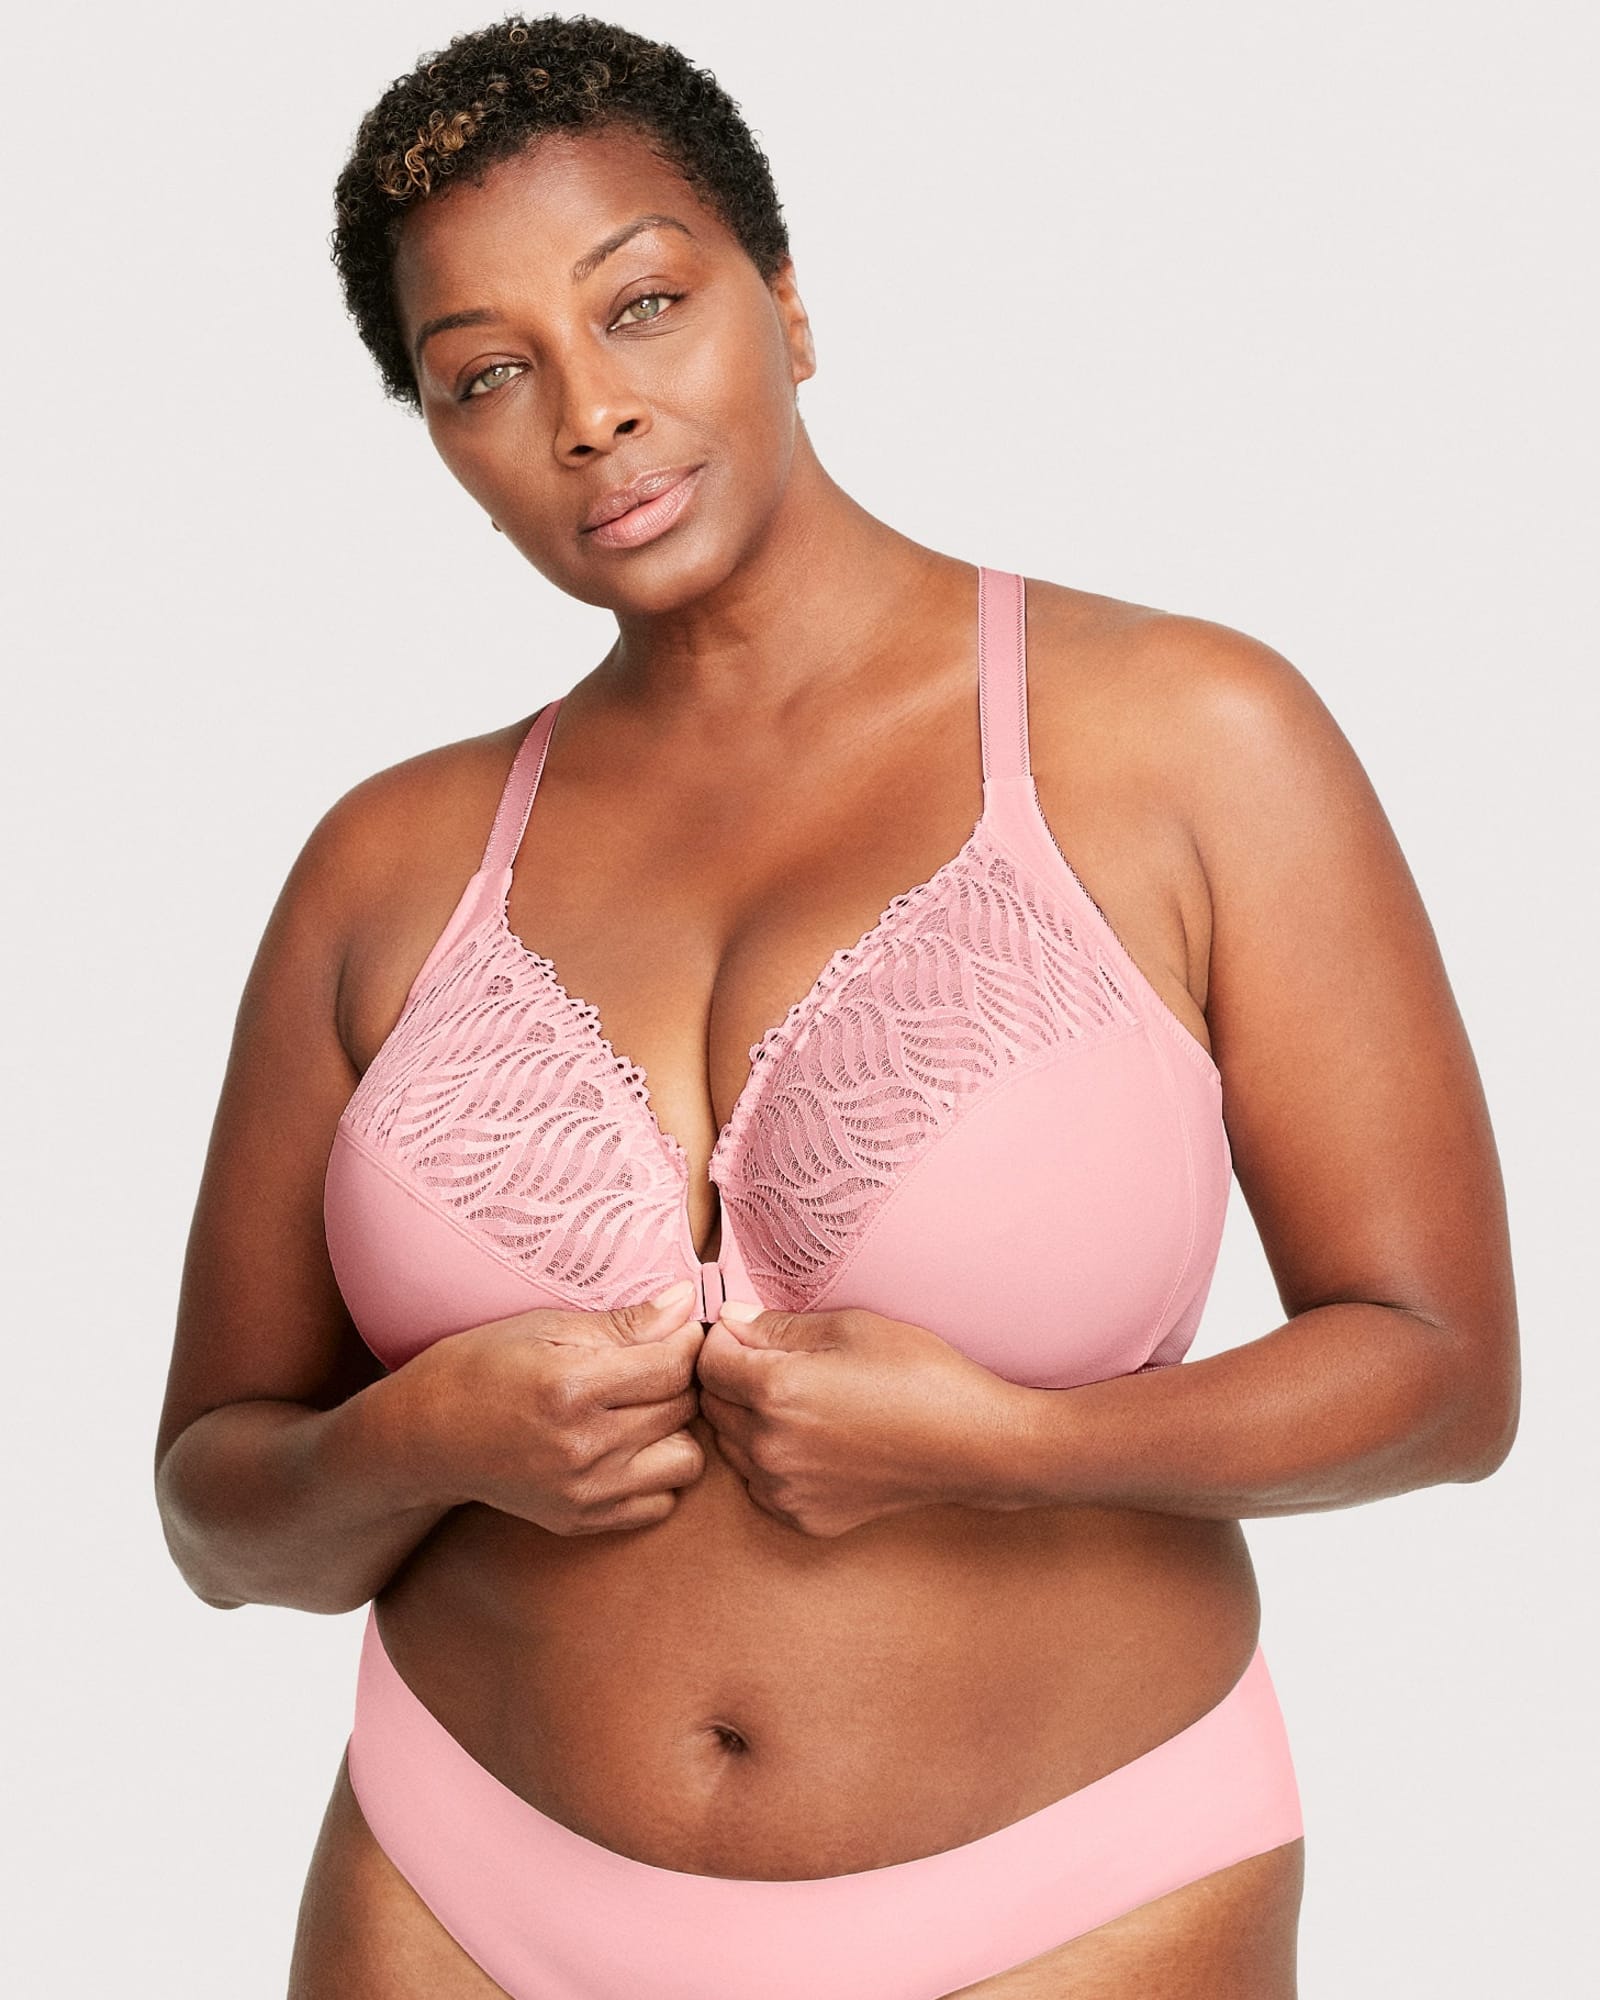 Lopecy-Sta Woman's Fashion Plus Size Wire Free Comfortable Push Up Hollow  Out Bra Underwear Bras for Women Everyday Bras Discount Clearance Pink 